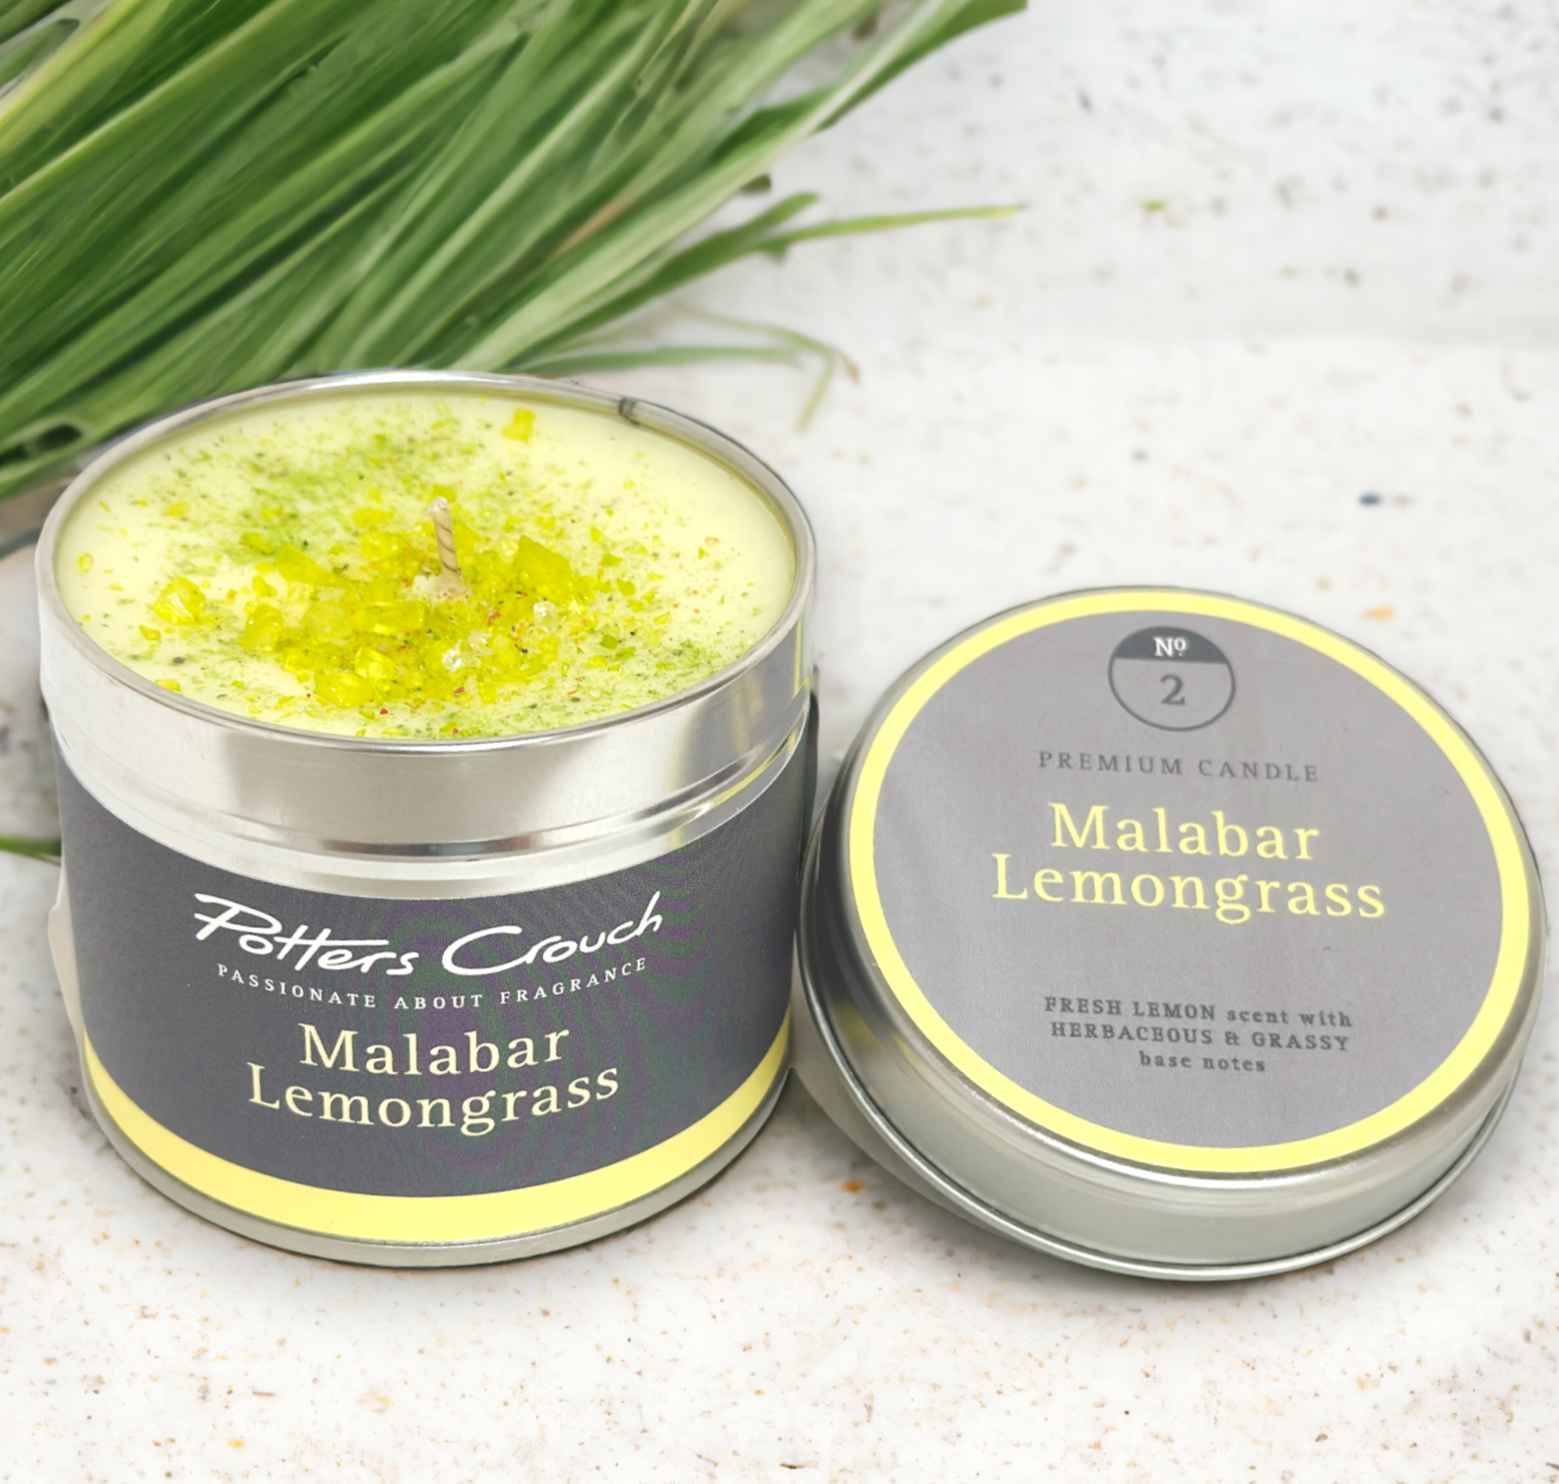 Zesty and clean citrus notes of lemongrass & a dash of herbs. Great for all those strong cooking smells.